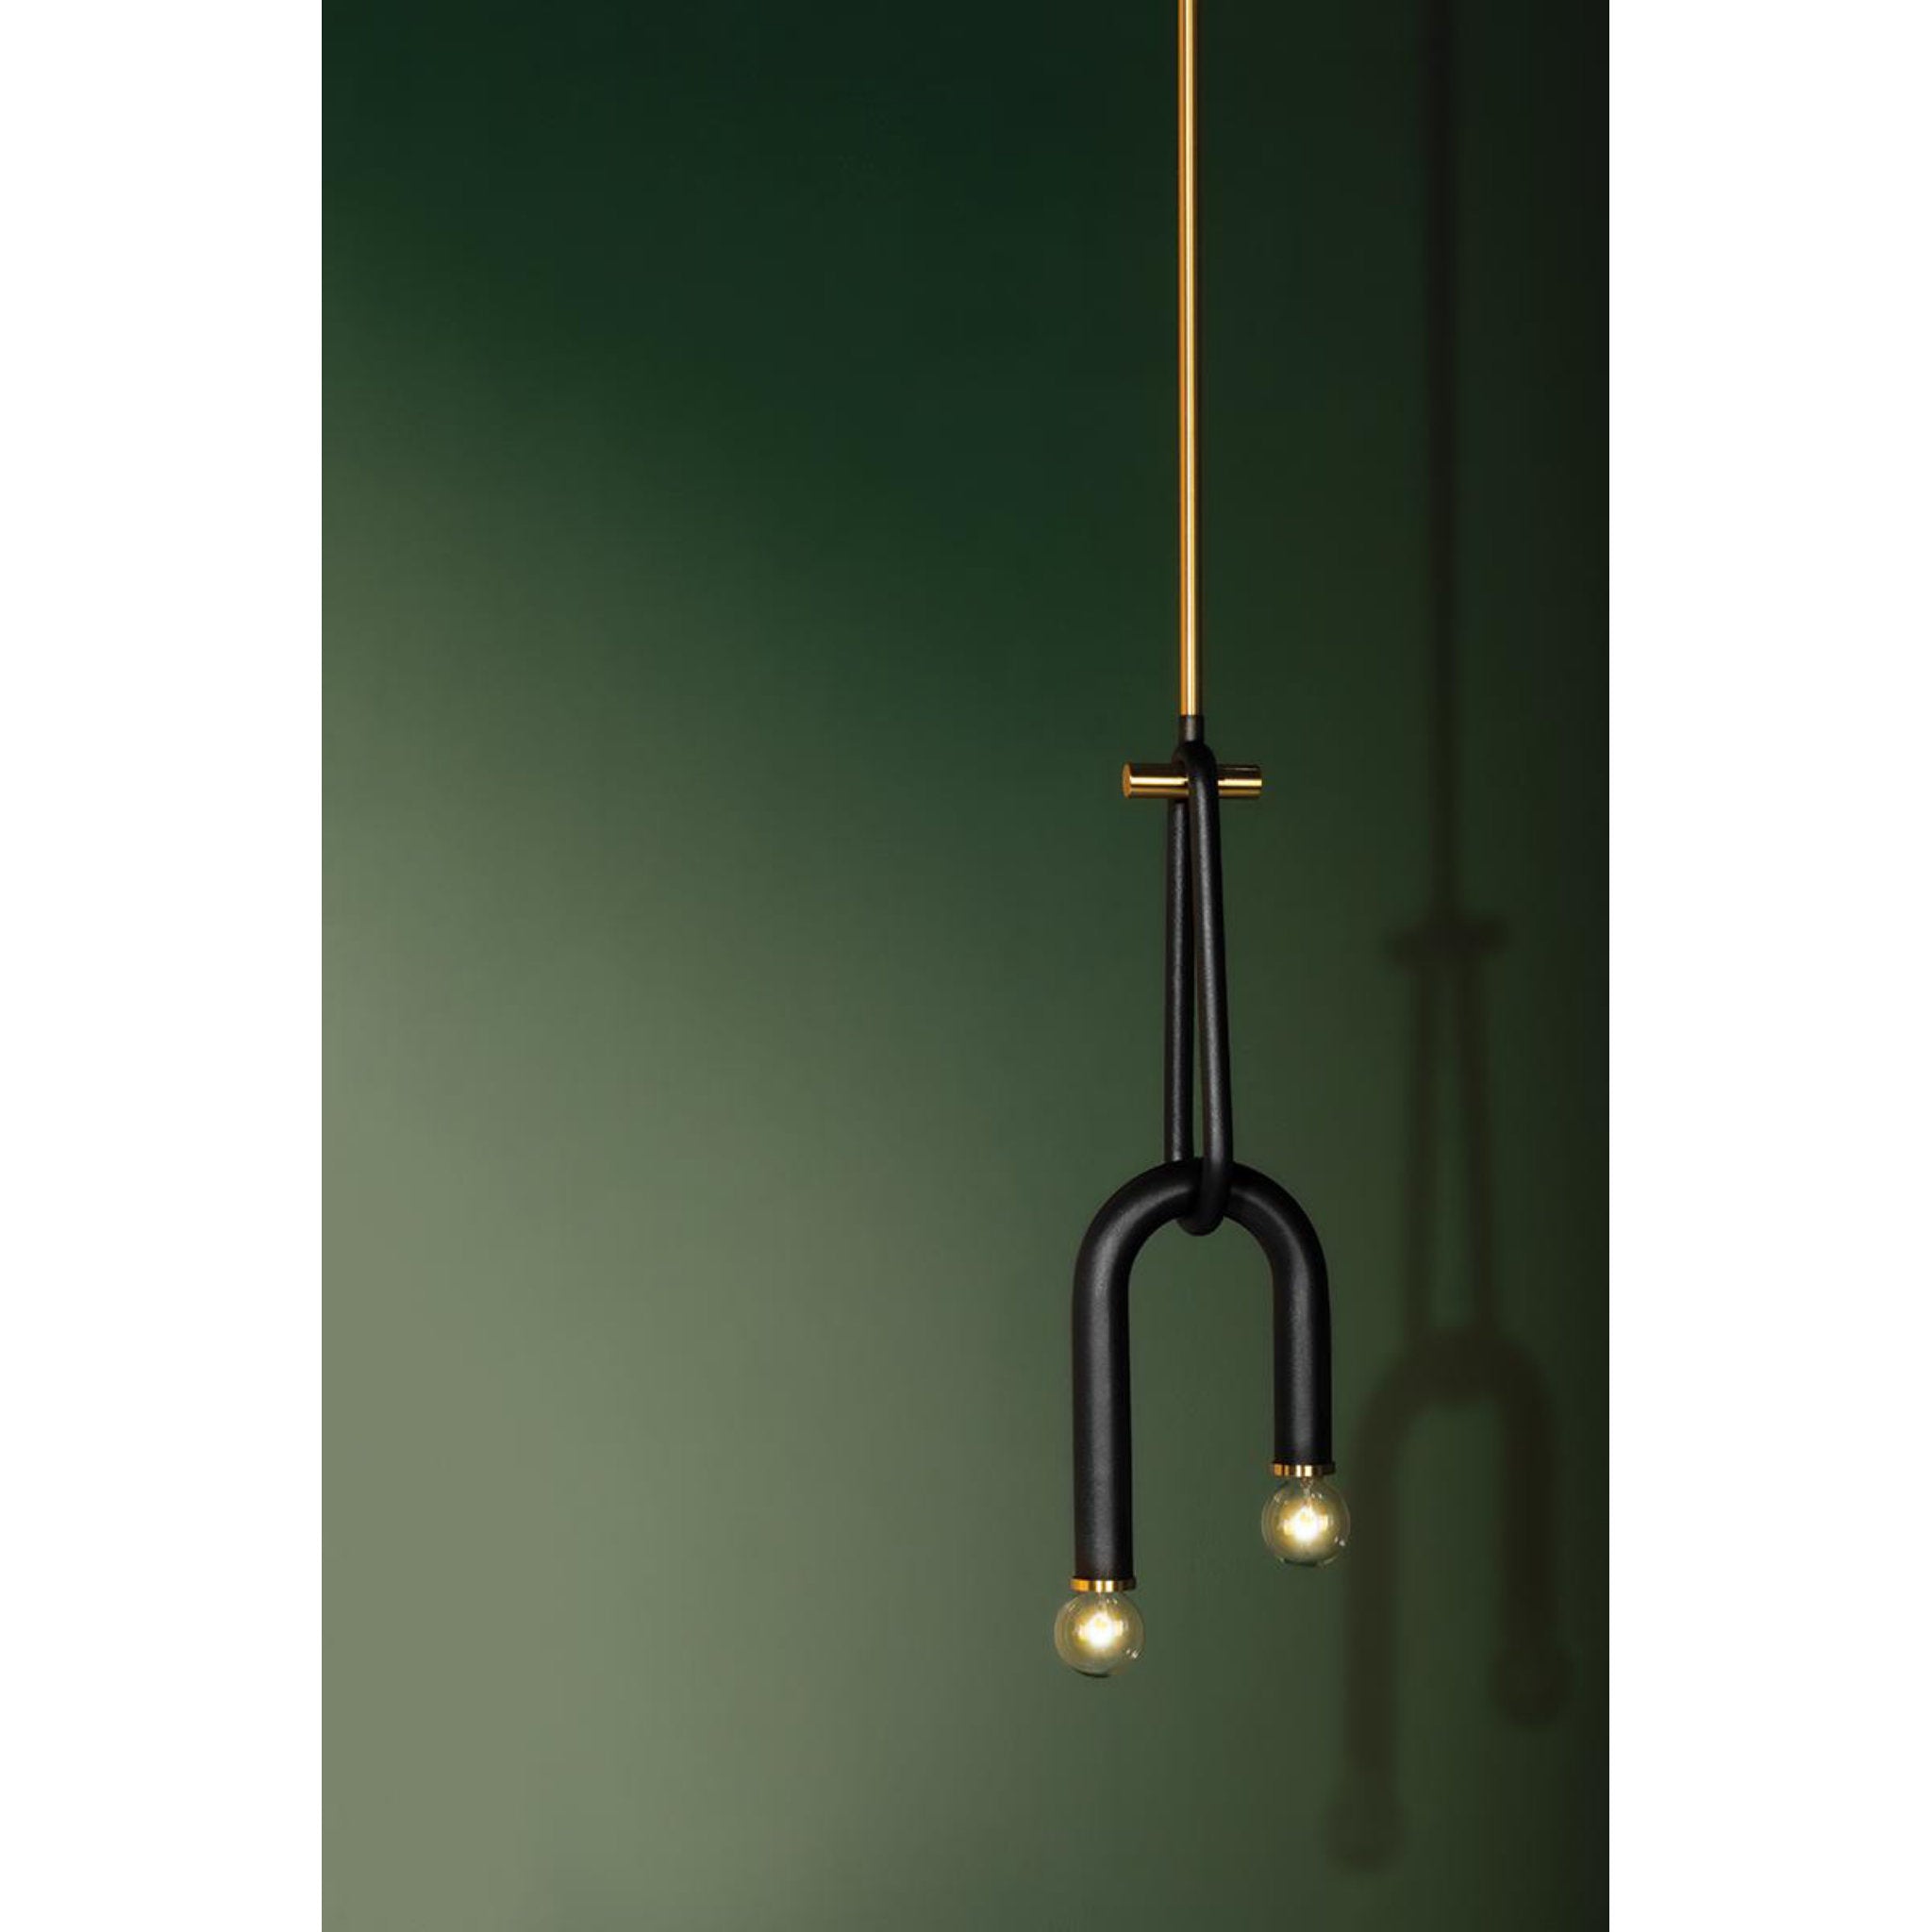 Whit 2-Light Wall Sconce in Aged Brass/Black